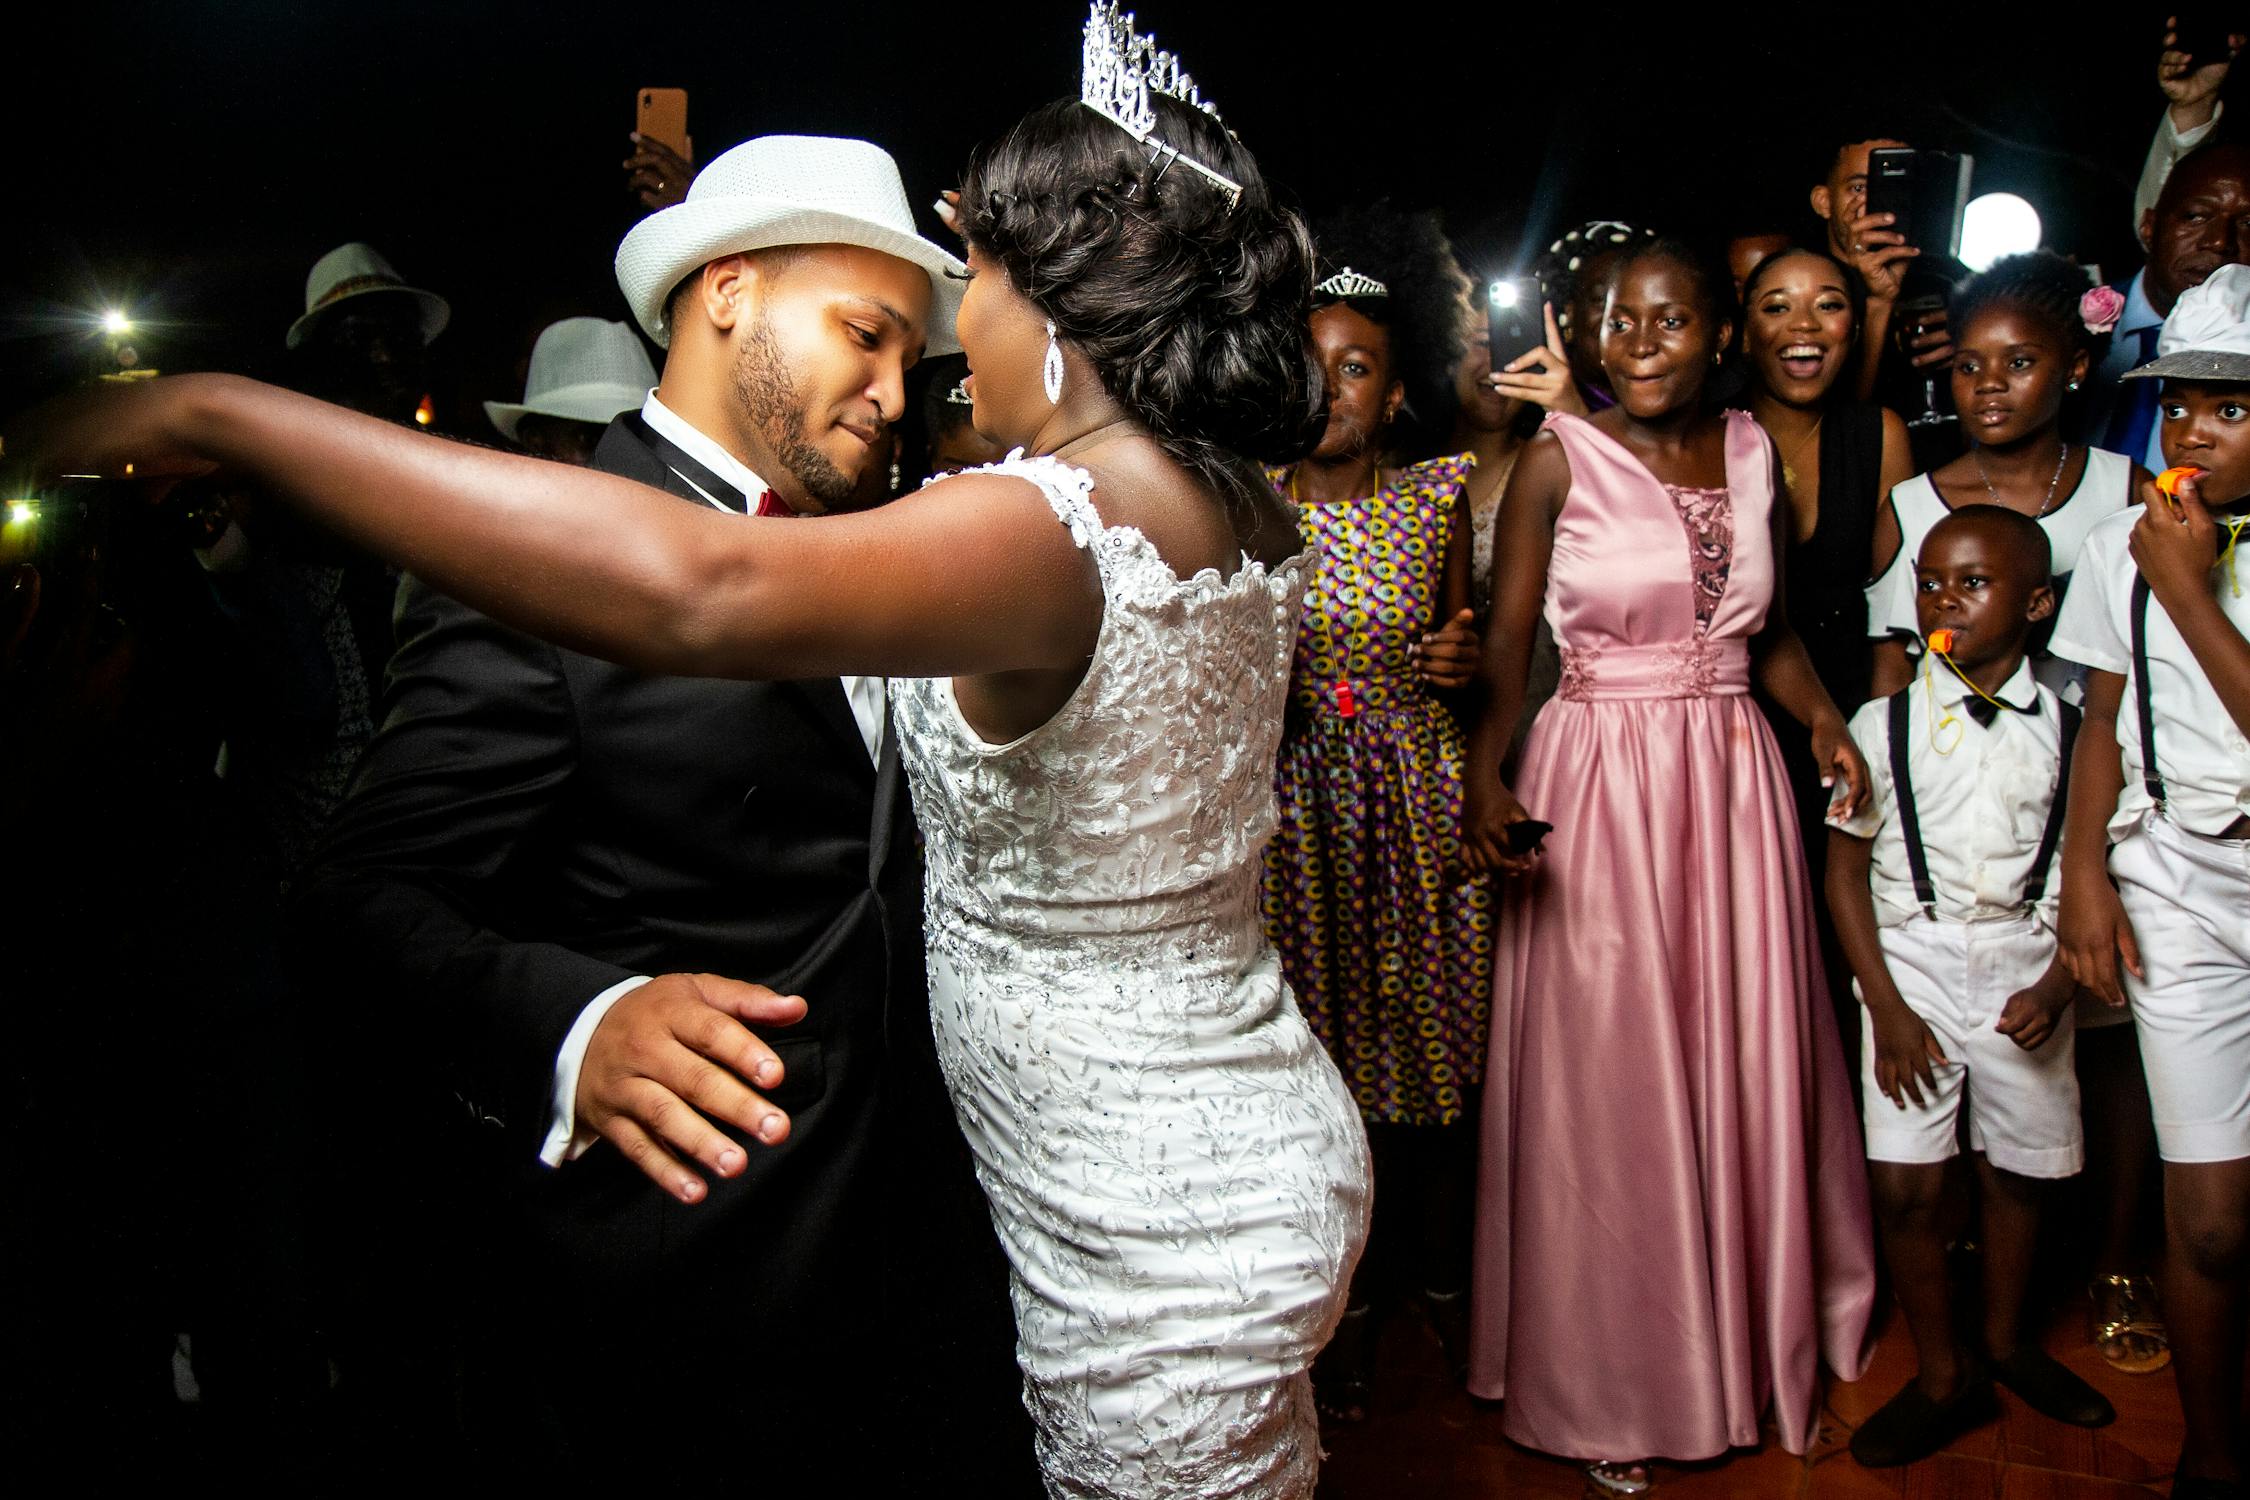 bride and groom dancing in front of guests at nighttime rooftop wedding reception